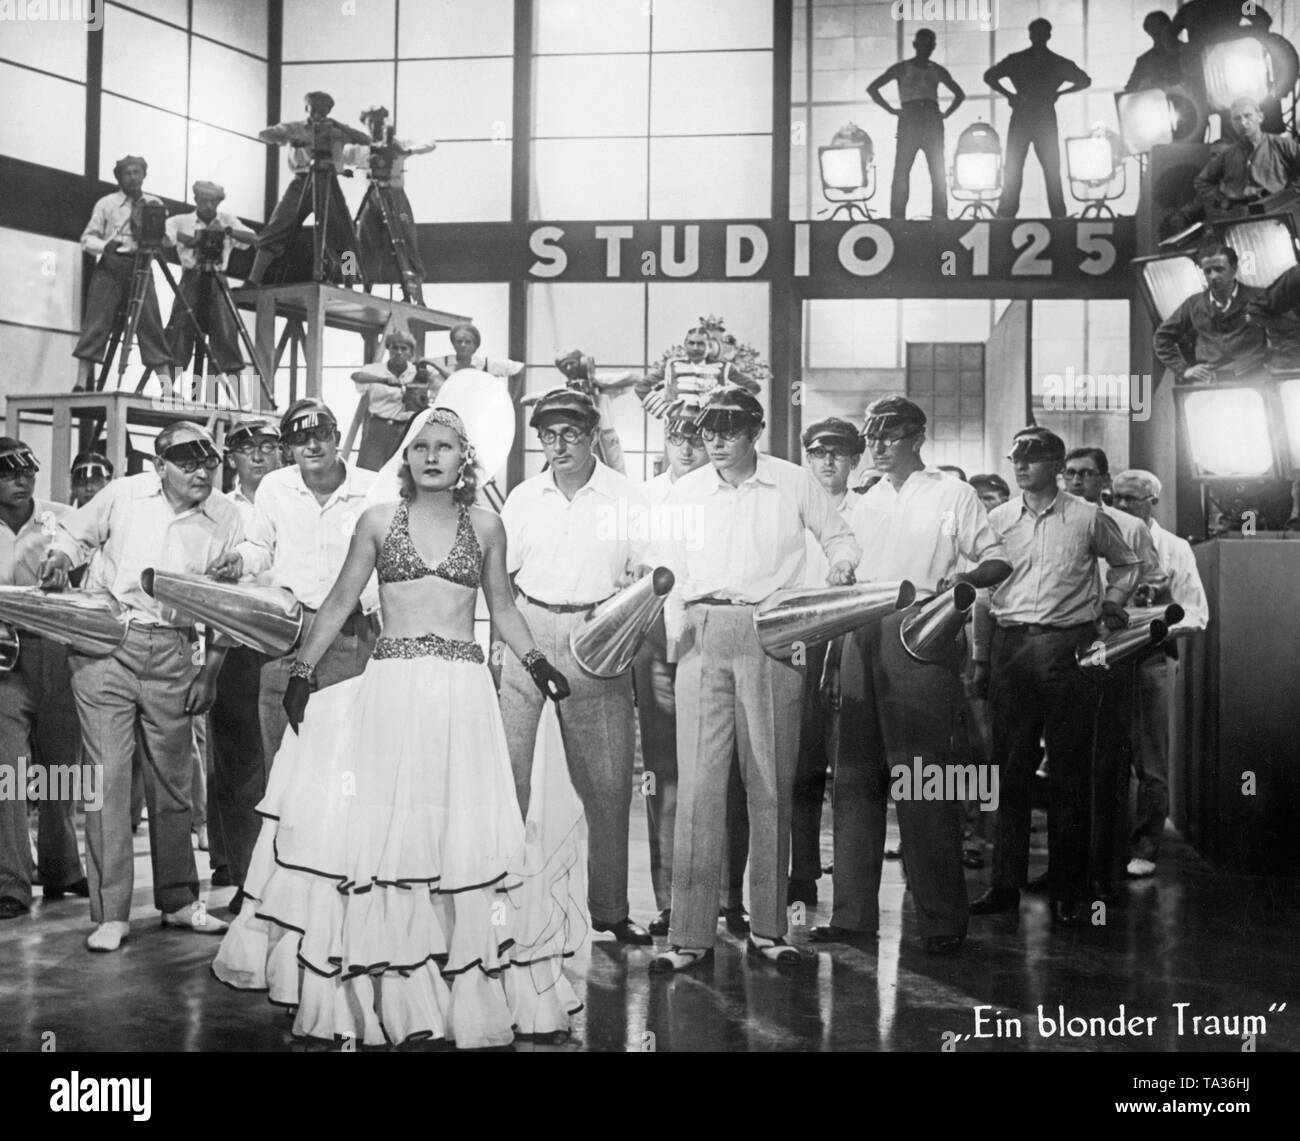 Lilian Harvey as Jou-Jou in the musical comedy 'A Blonde Dream' in the UFA studio, directed by Paul Martin. This was one of the most successful films in the late phase of the Weimar Republic. Stock Photo